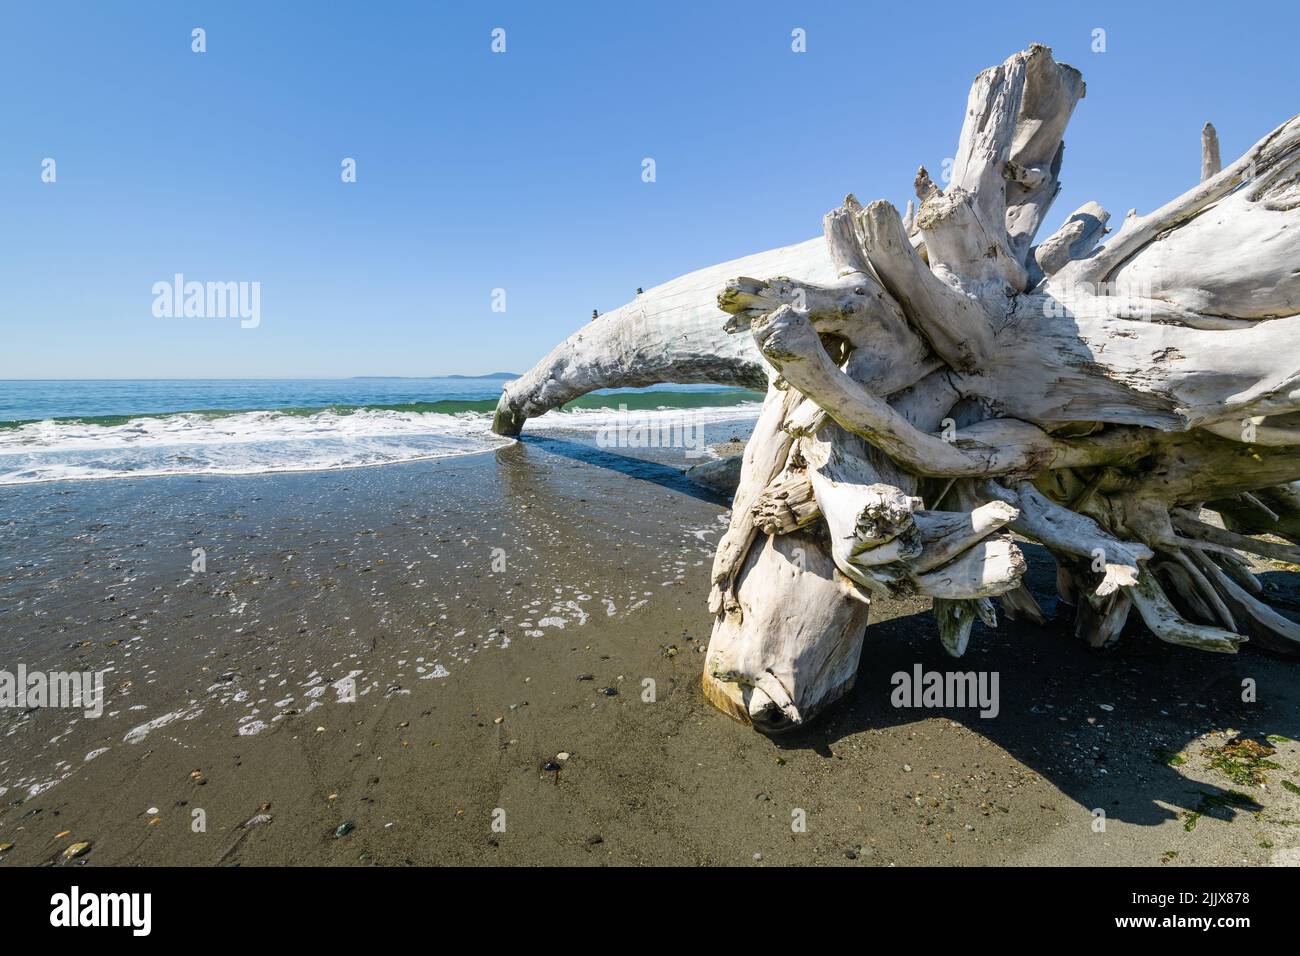 A weathered driftwood tree on a beach on the Washington State coast under a blue sky as the waves cover the beach Stock Photo